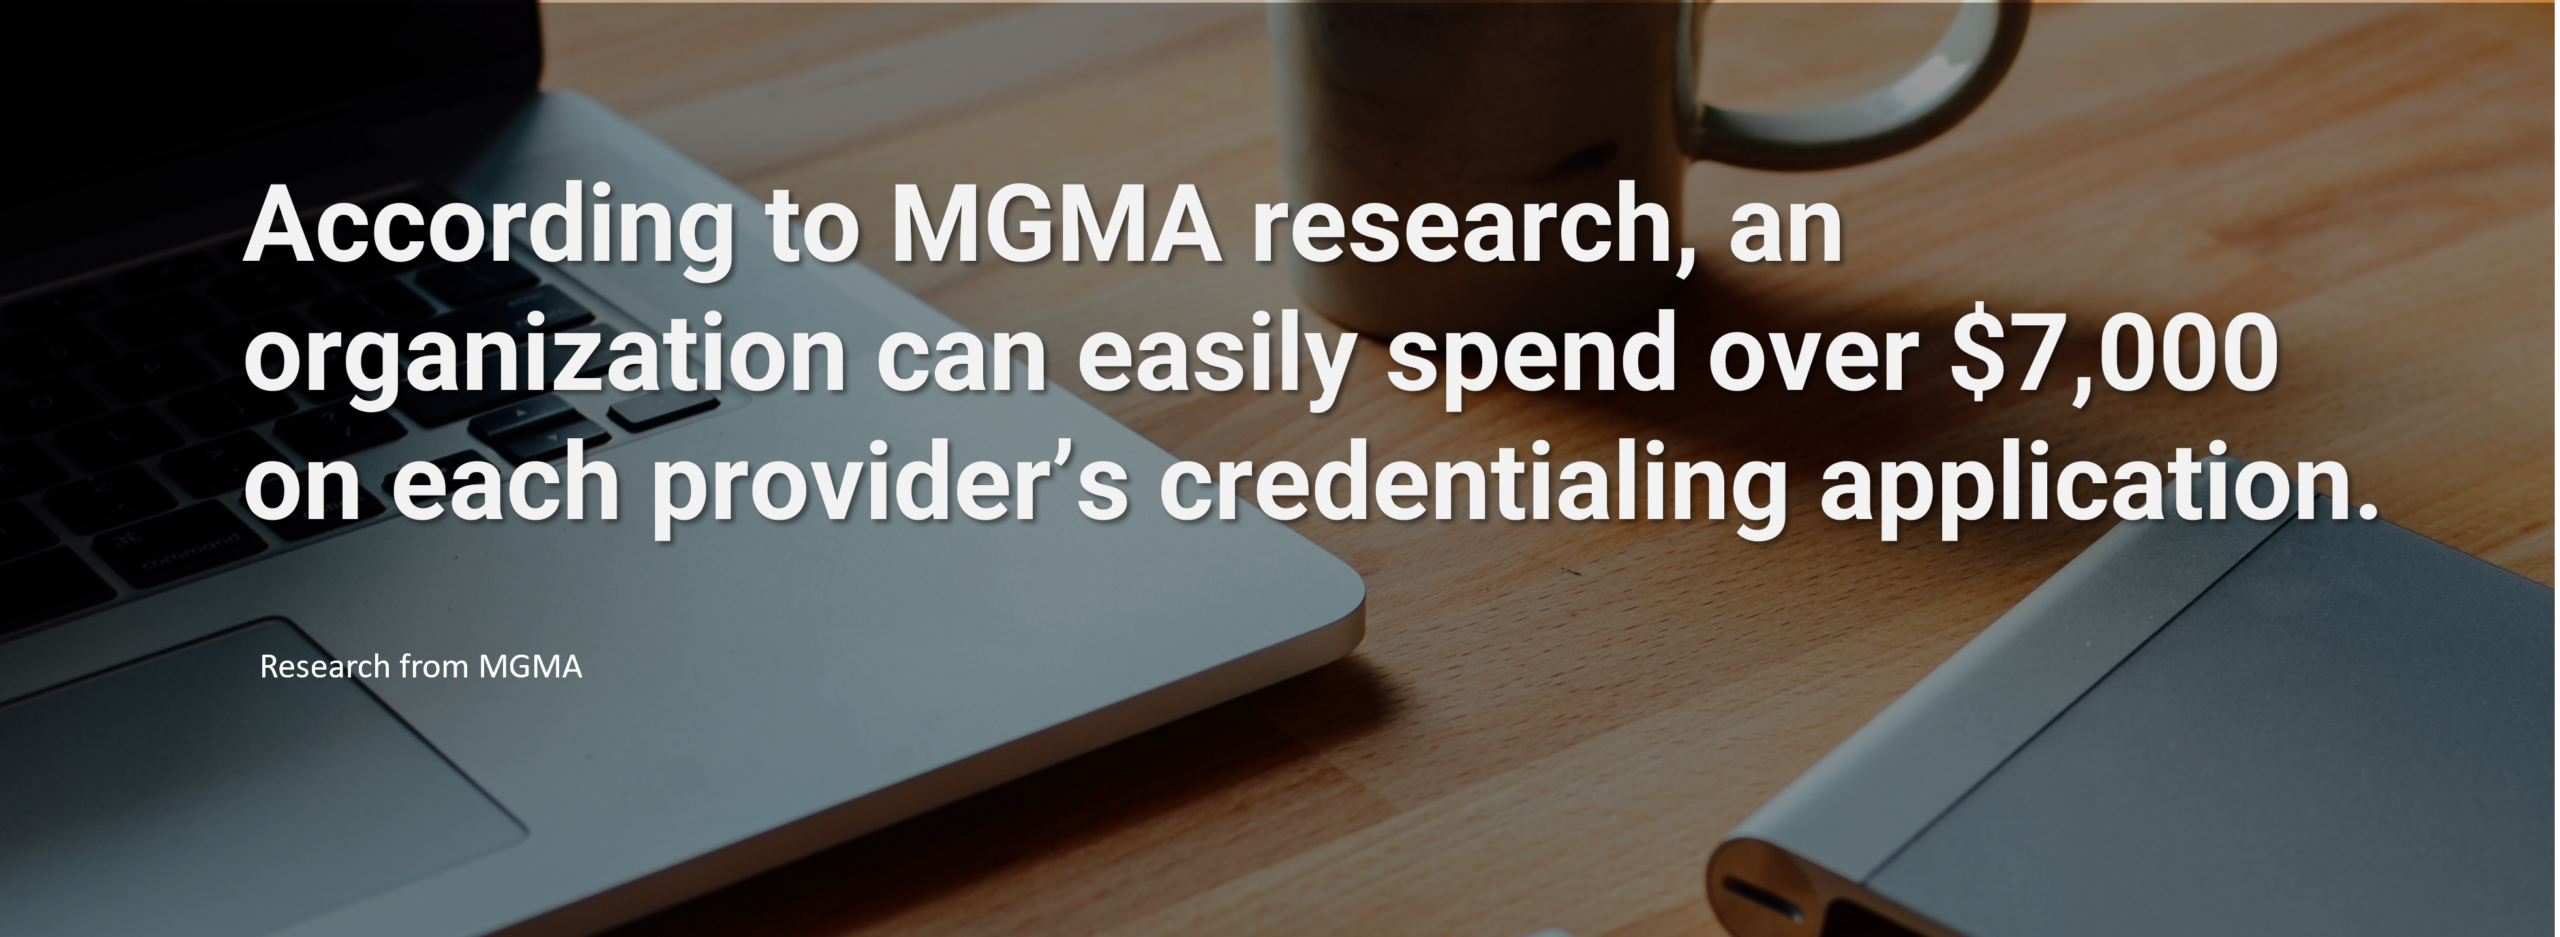 MGMA Research $7000 Cost Per Provider Credentialing Application